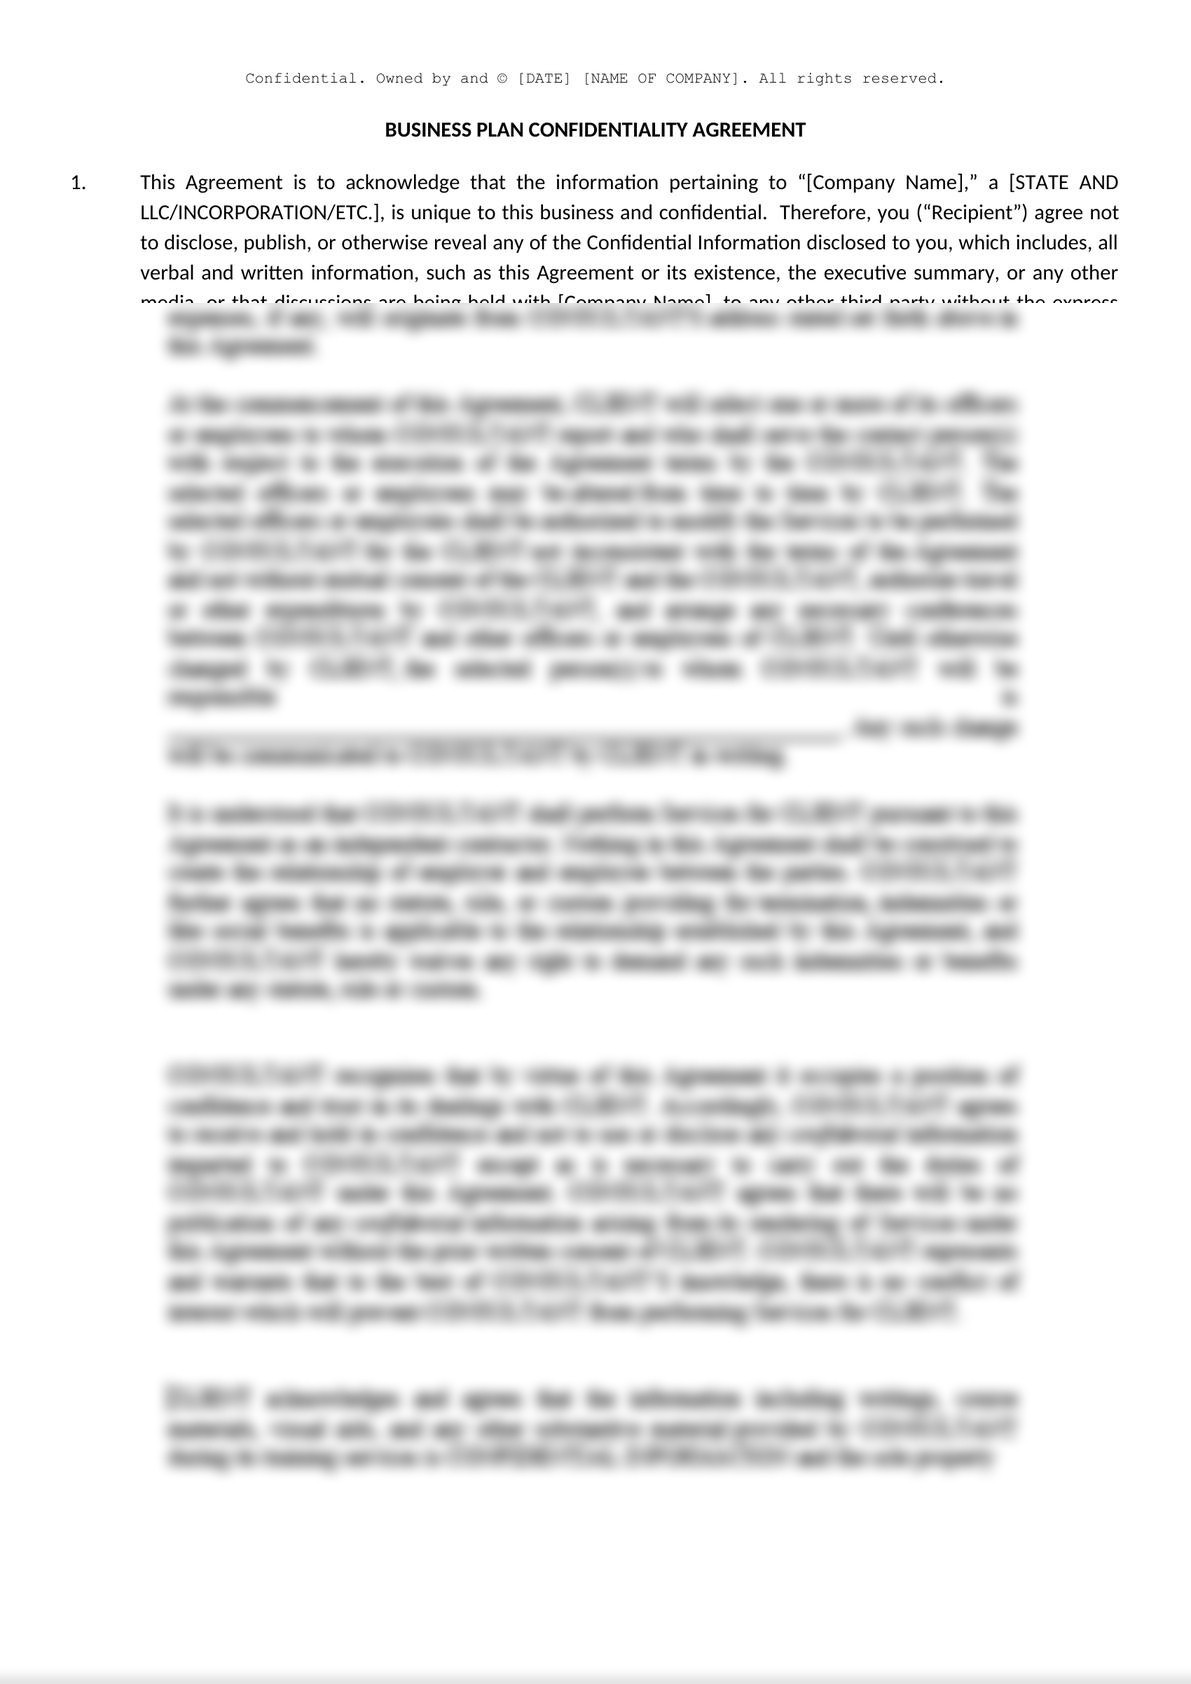 Confidentiality Agreement for Business Plan Sample-0